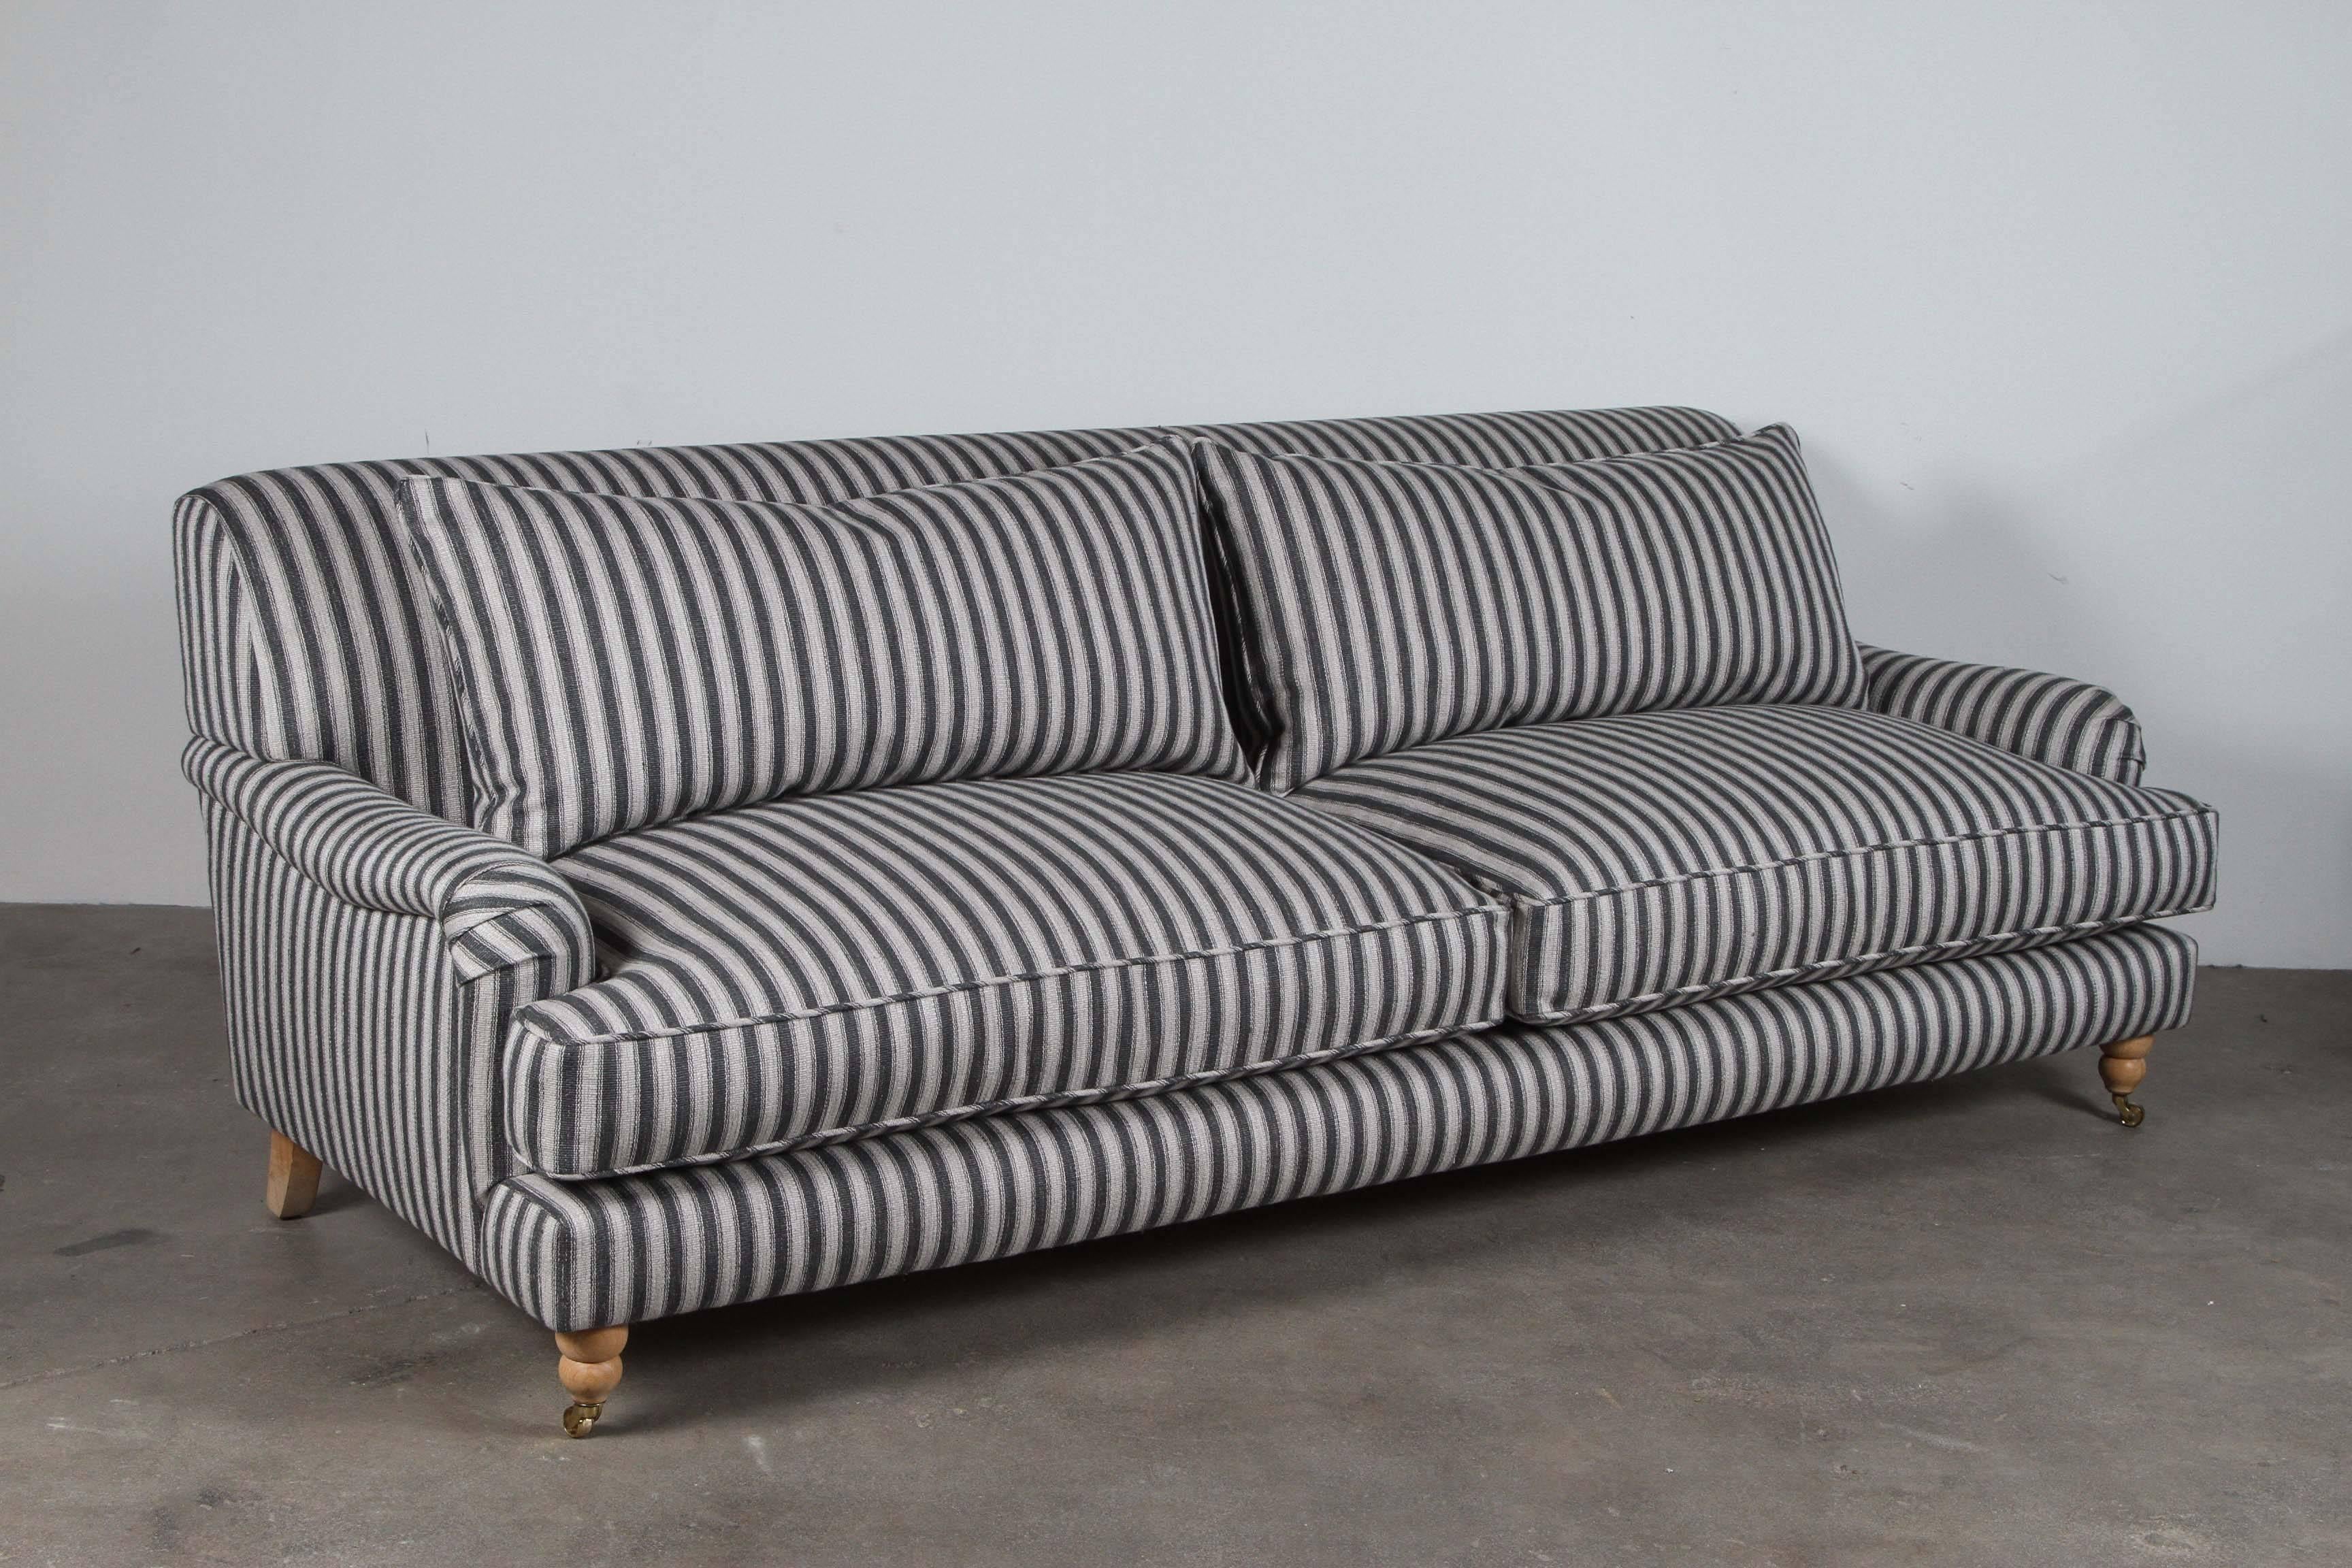 Traditional sofa newly upholstered in striped fabric. Loose cushion seat and back with rolled arms. Turned feet on casters.